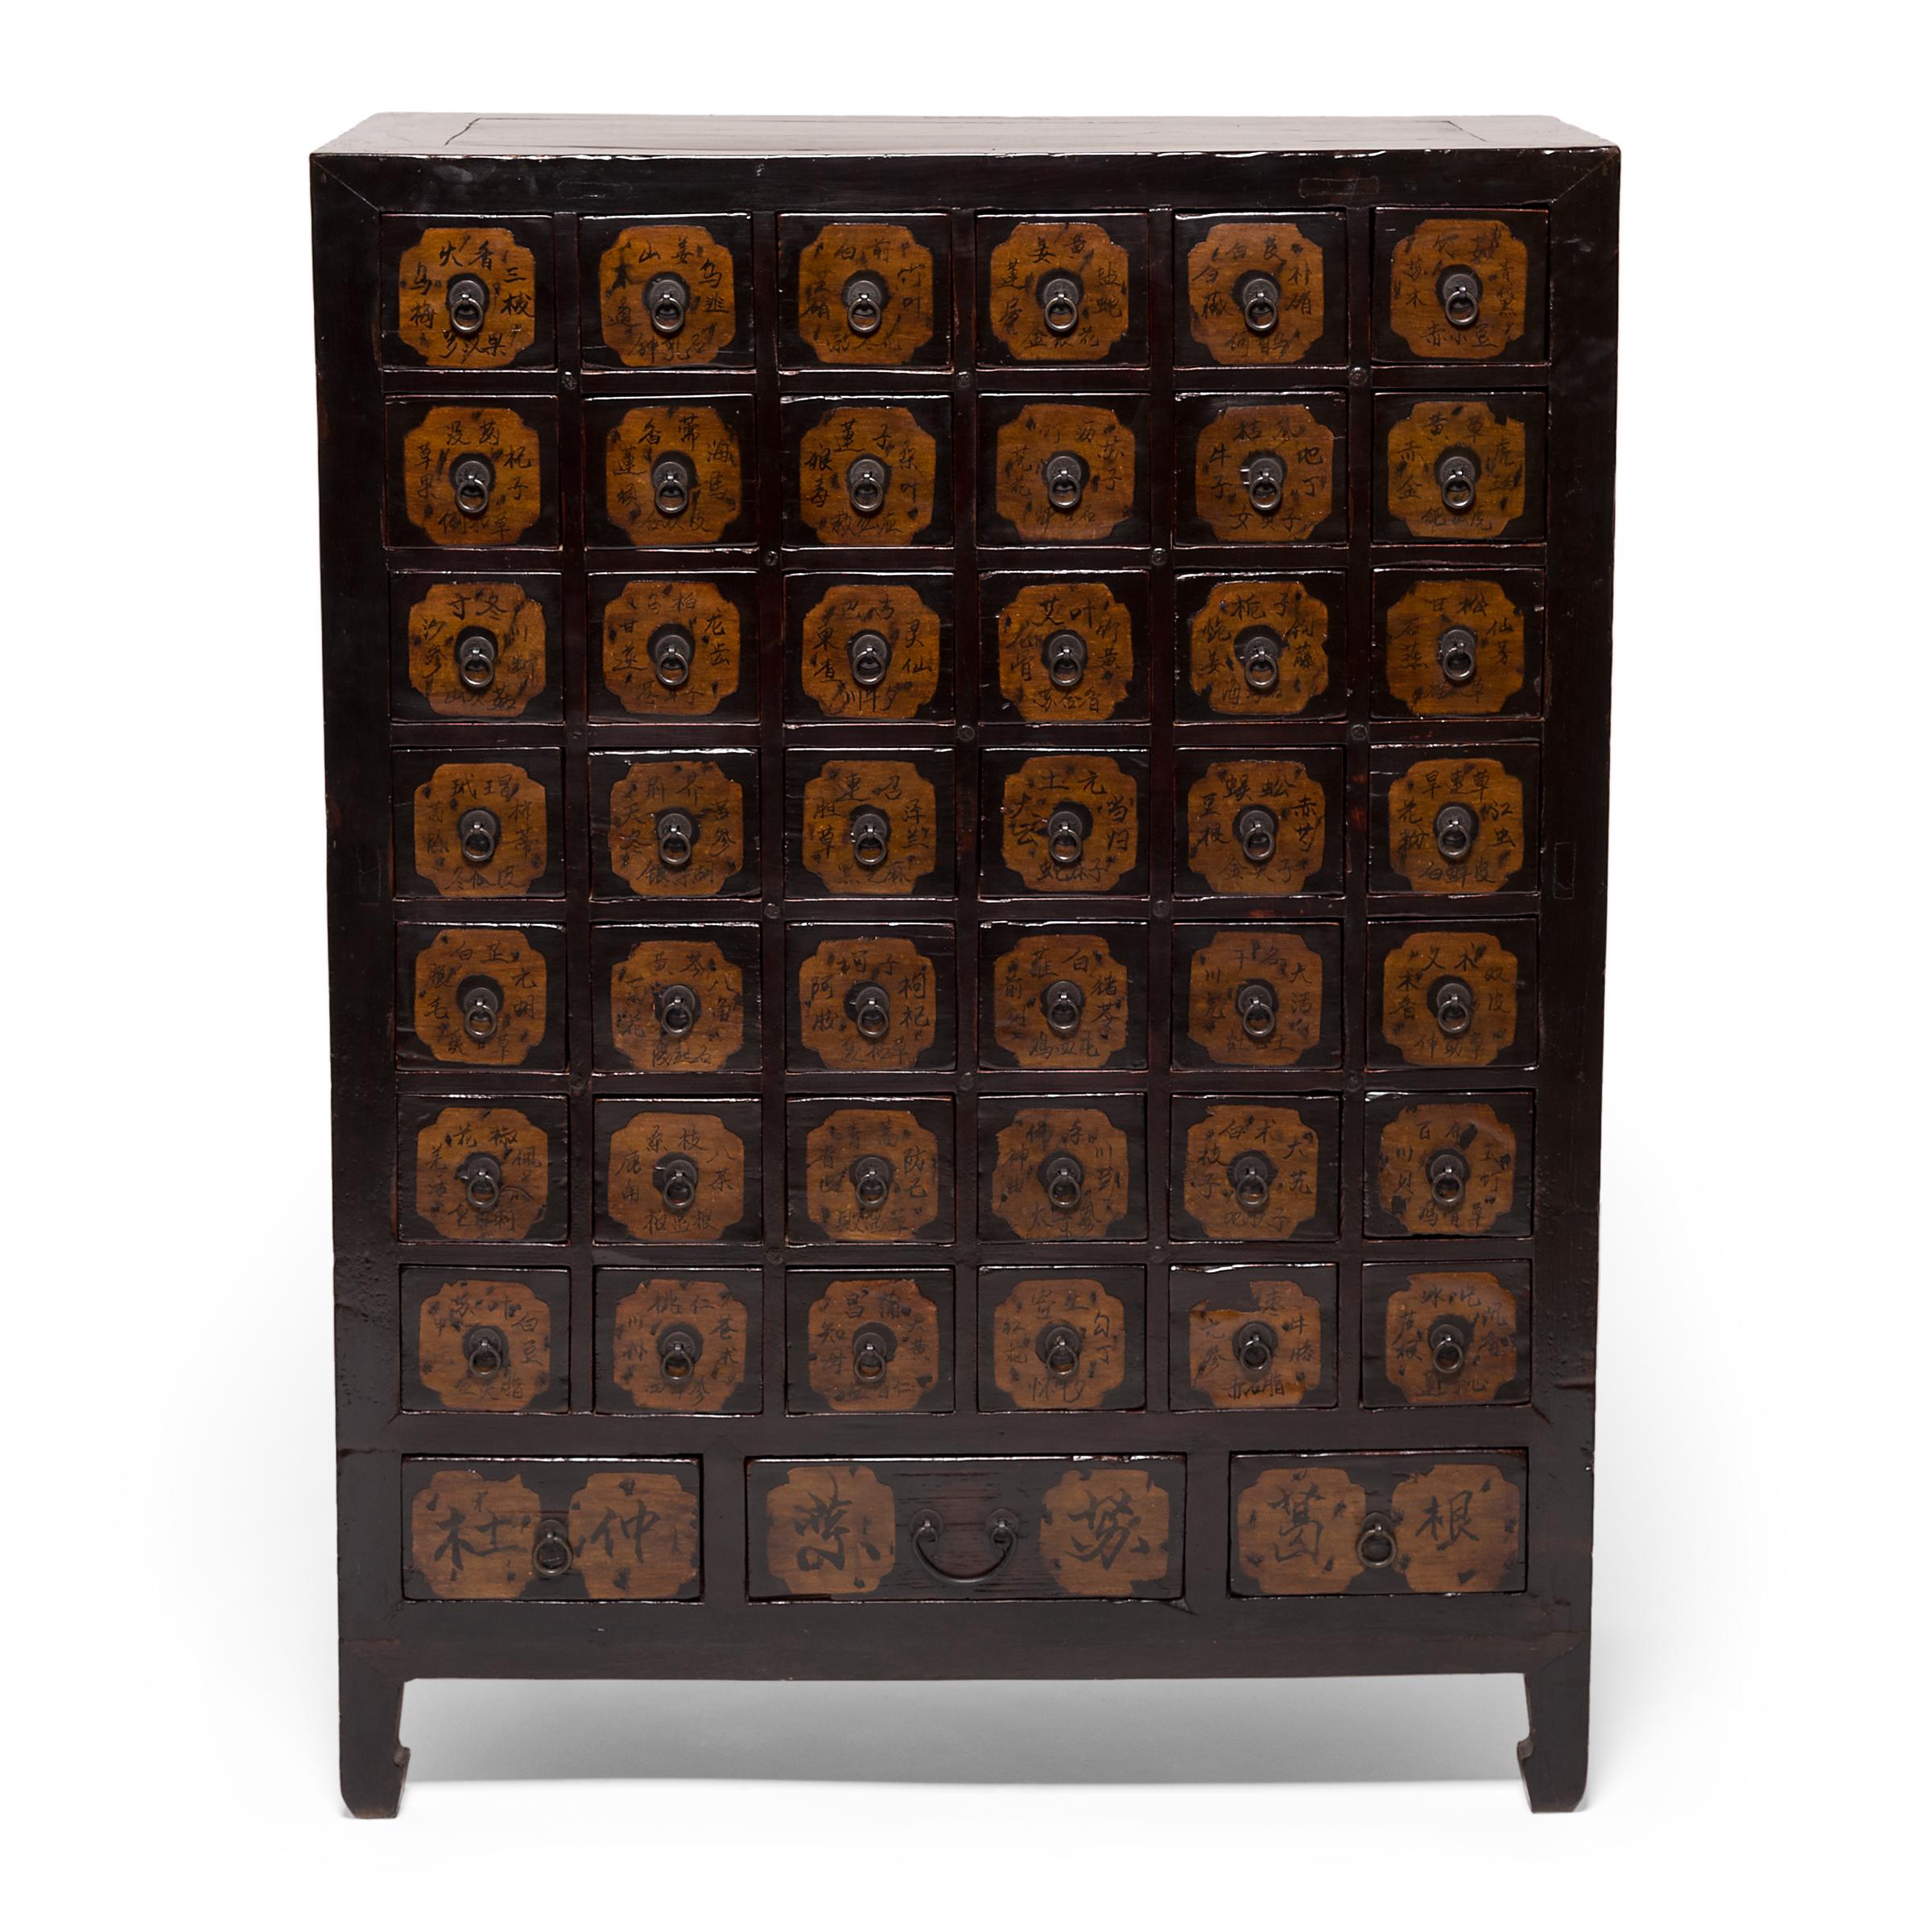 It is unusual to find a pair of 19th century Chinese apothecary chests that have remained together during the past century. Cabinets like this were originally used by doctors to organize and store herbal medicines. Each of the chests has 46 drawers